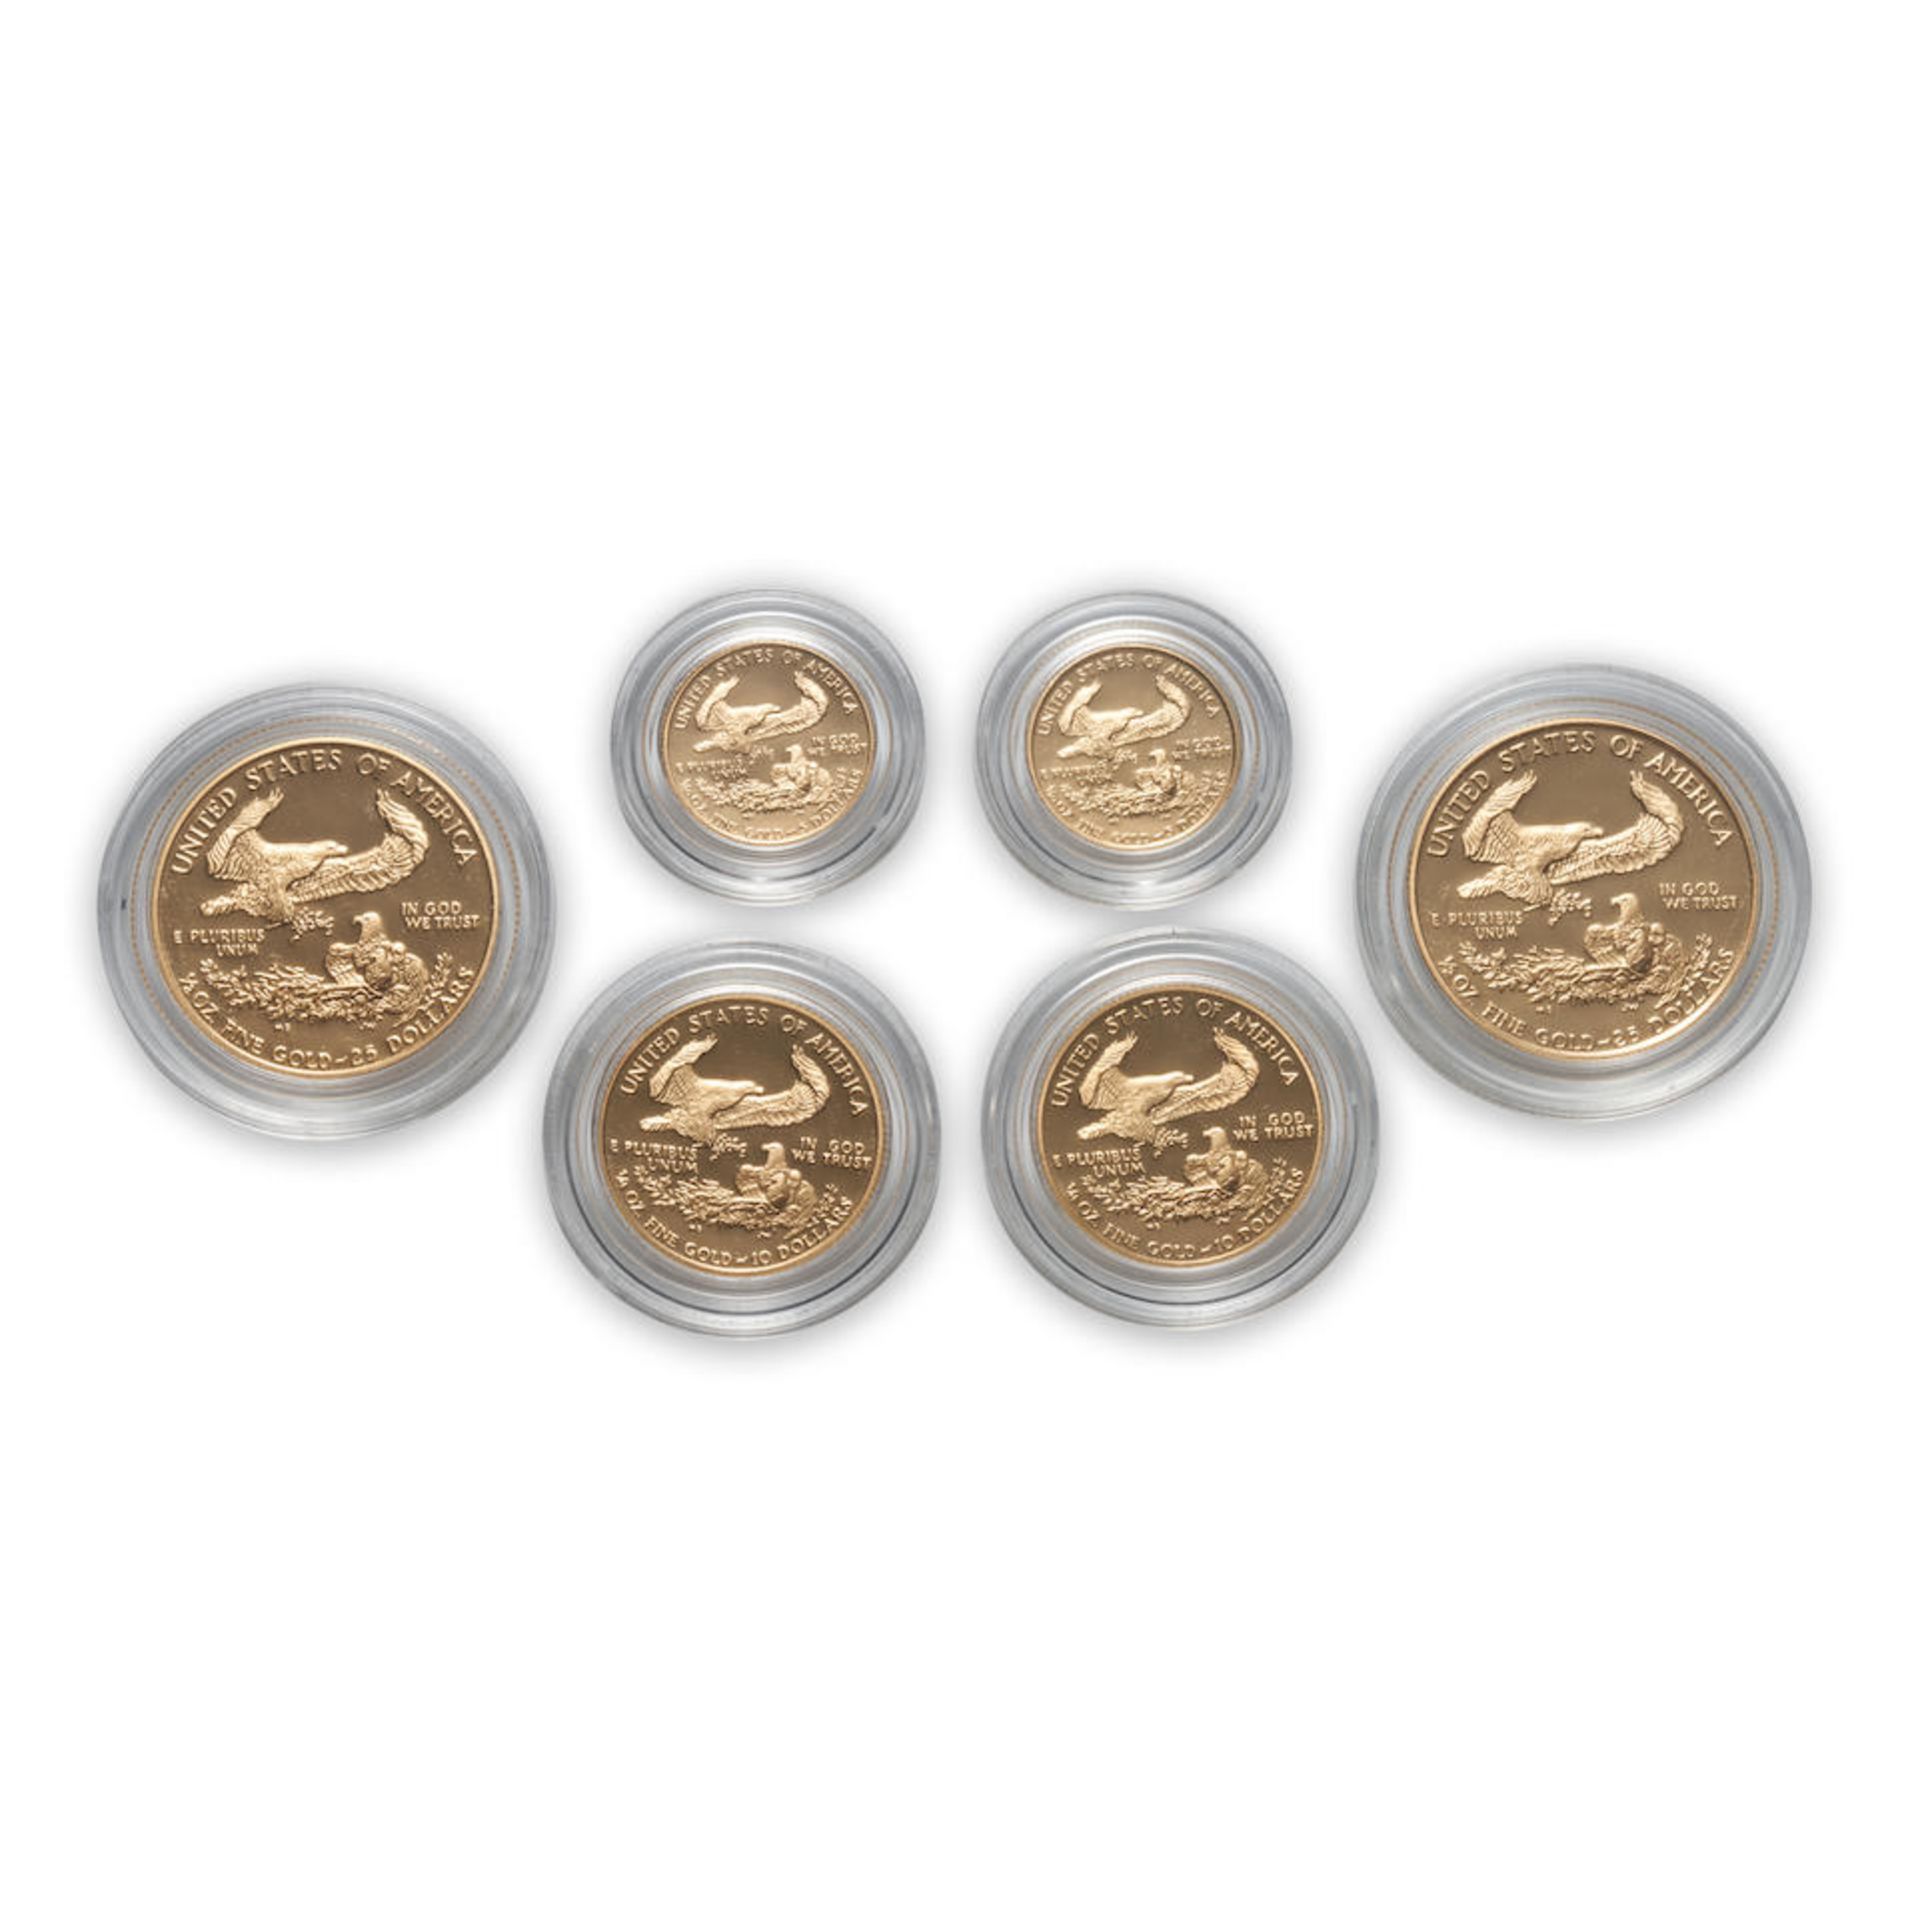 United States Proof Gold Eagles. - Image 2 of 2